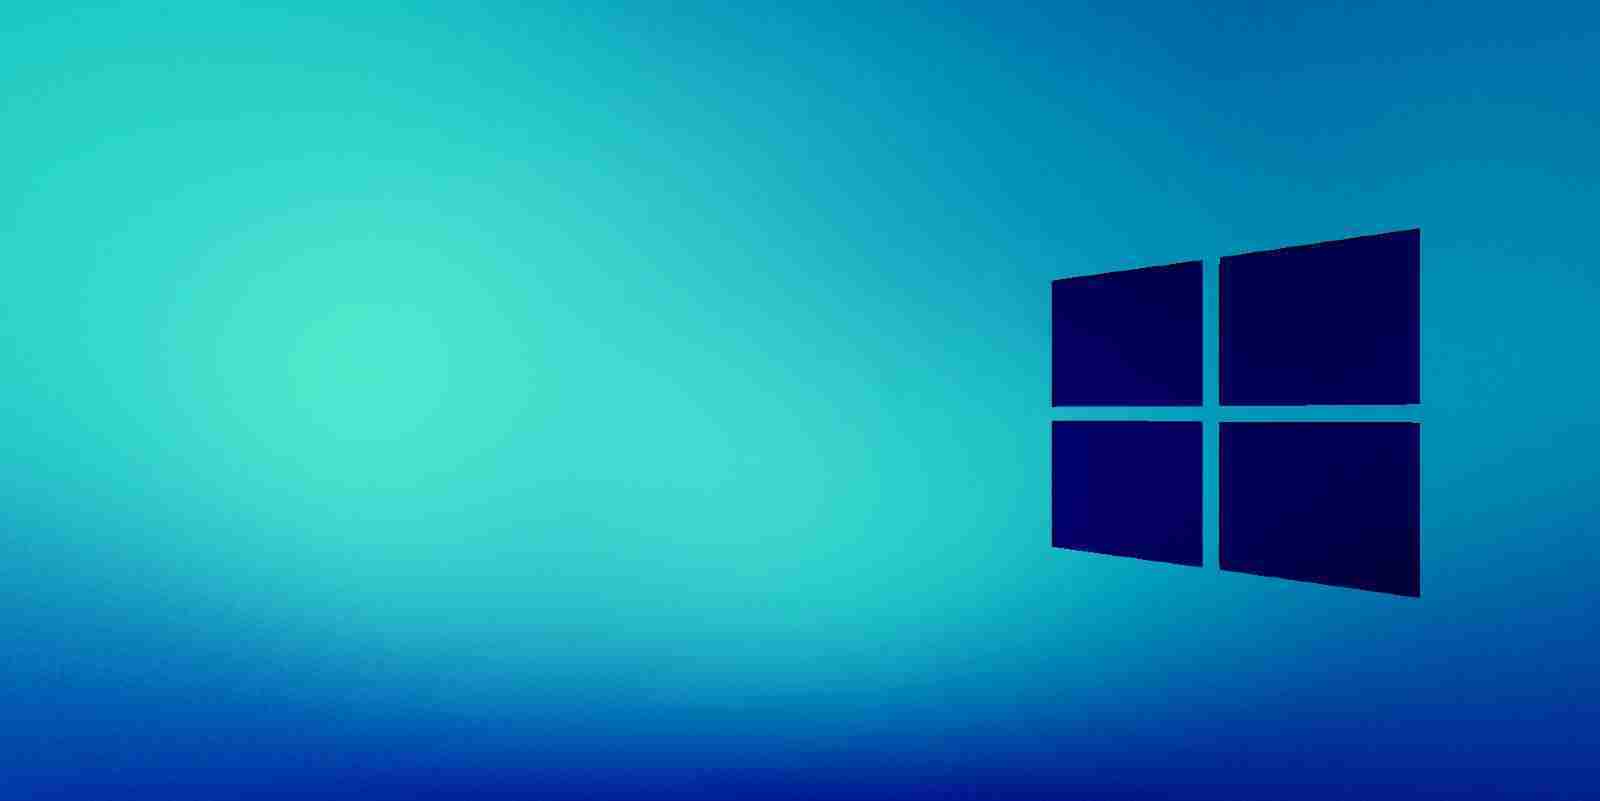 Windows 10 Clipboard History Now Lets You Paste As Plain Text - Privacy ...